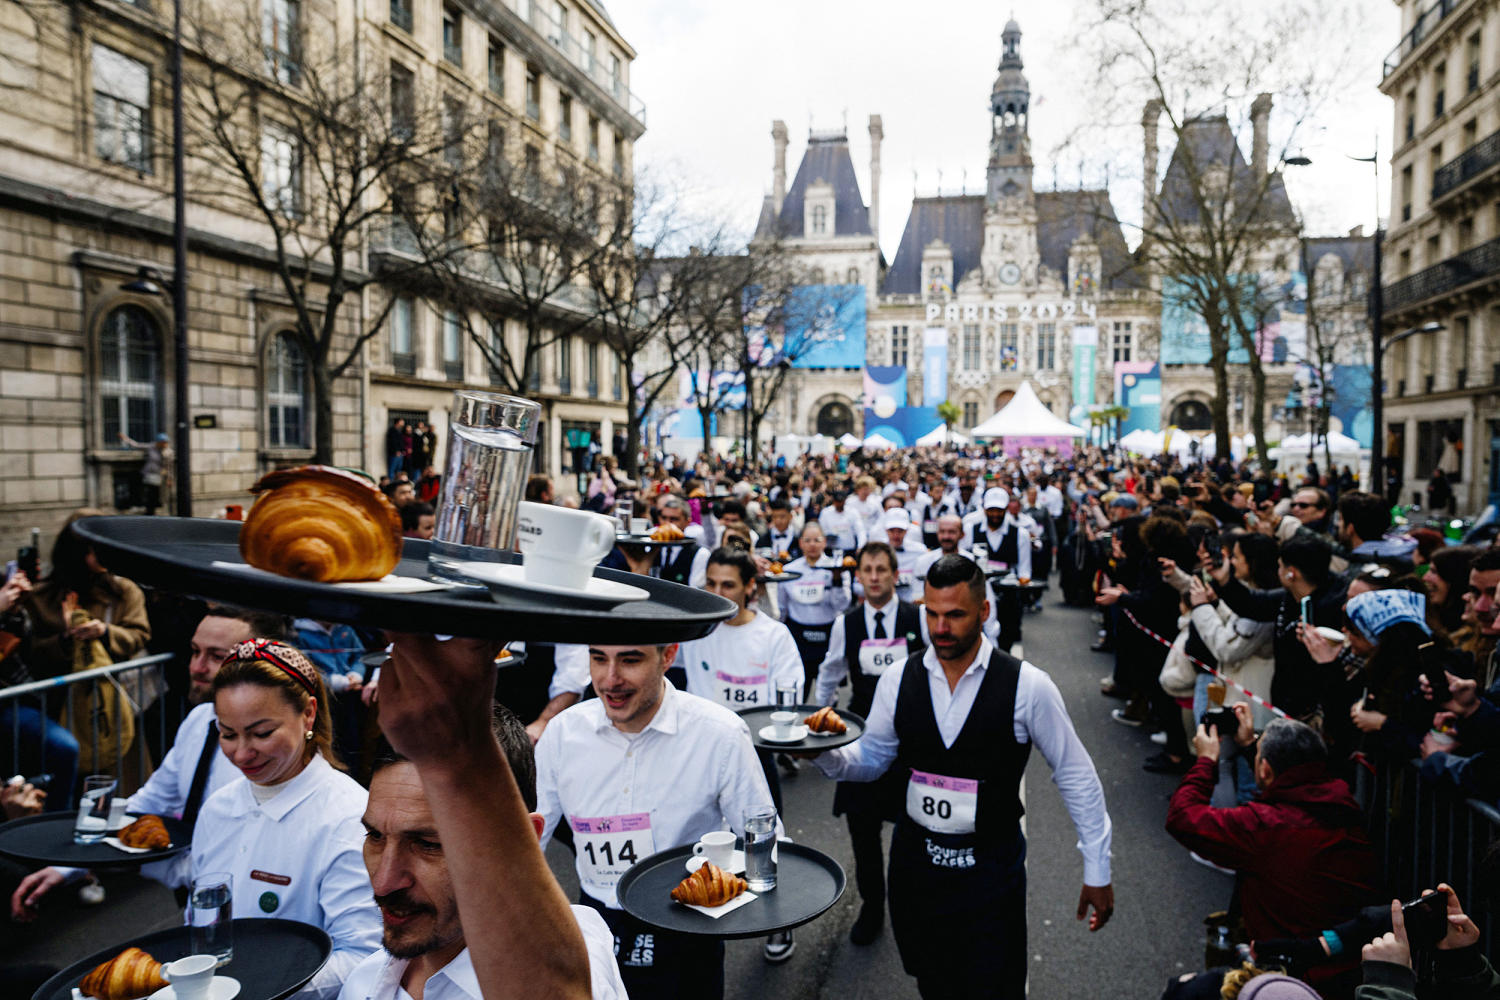 Paris waiters race through the streets to celebrate French capital's life and soul ahead of Olympics